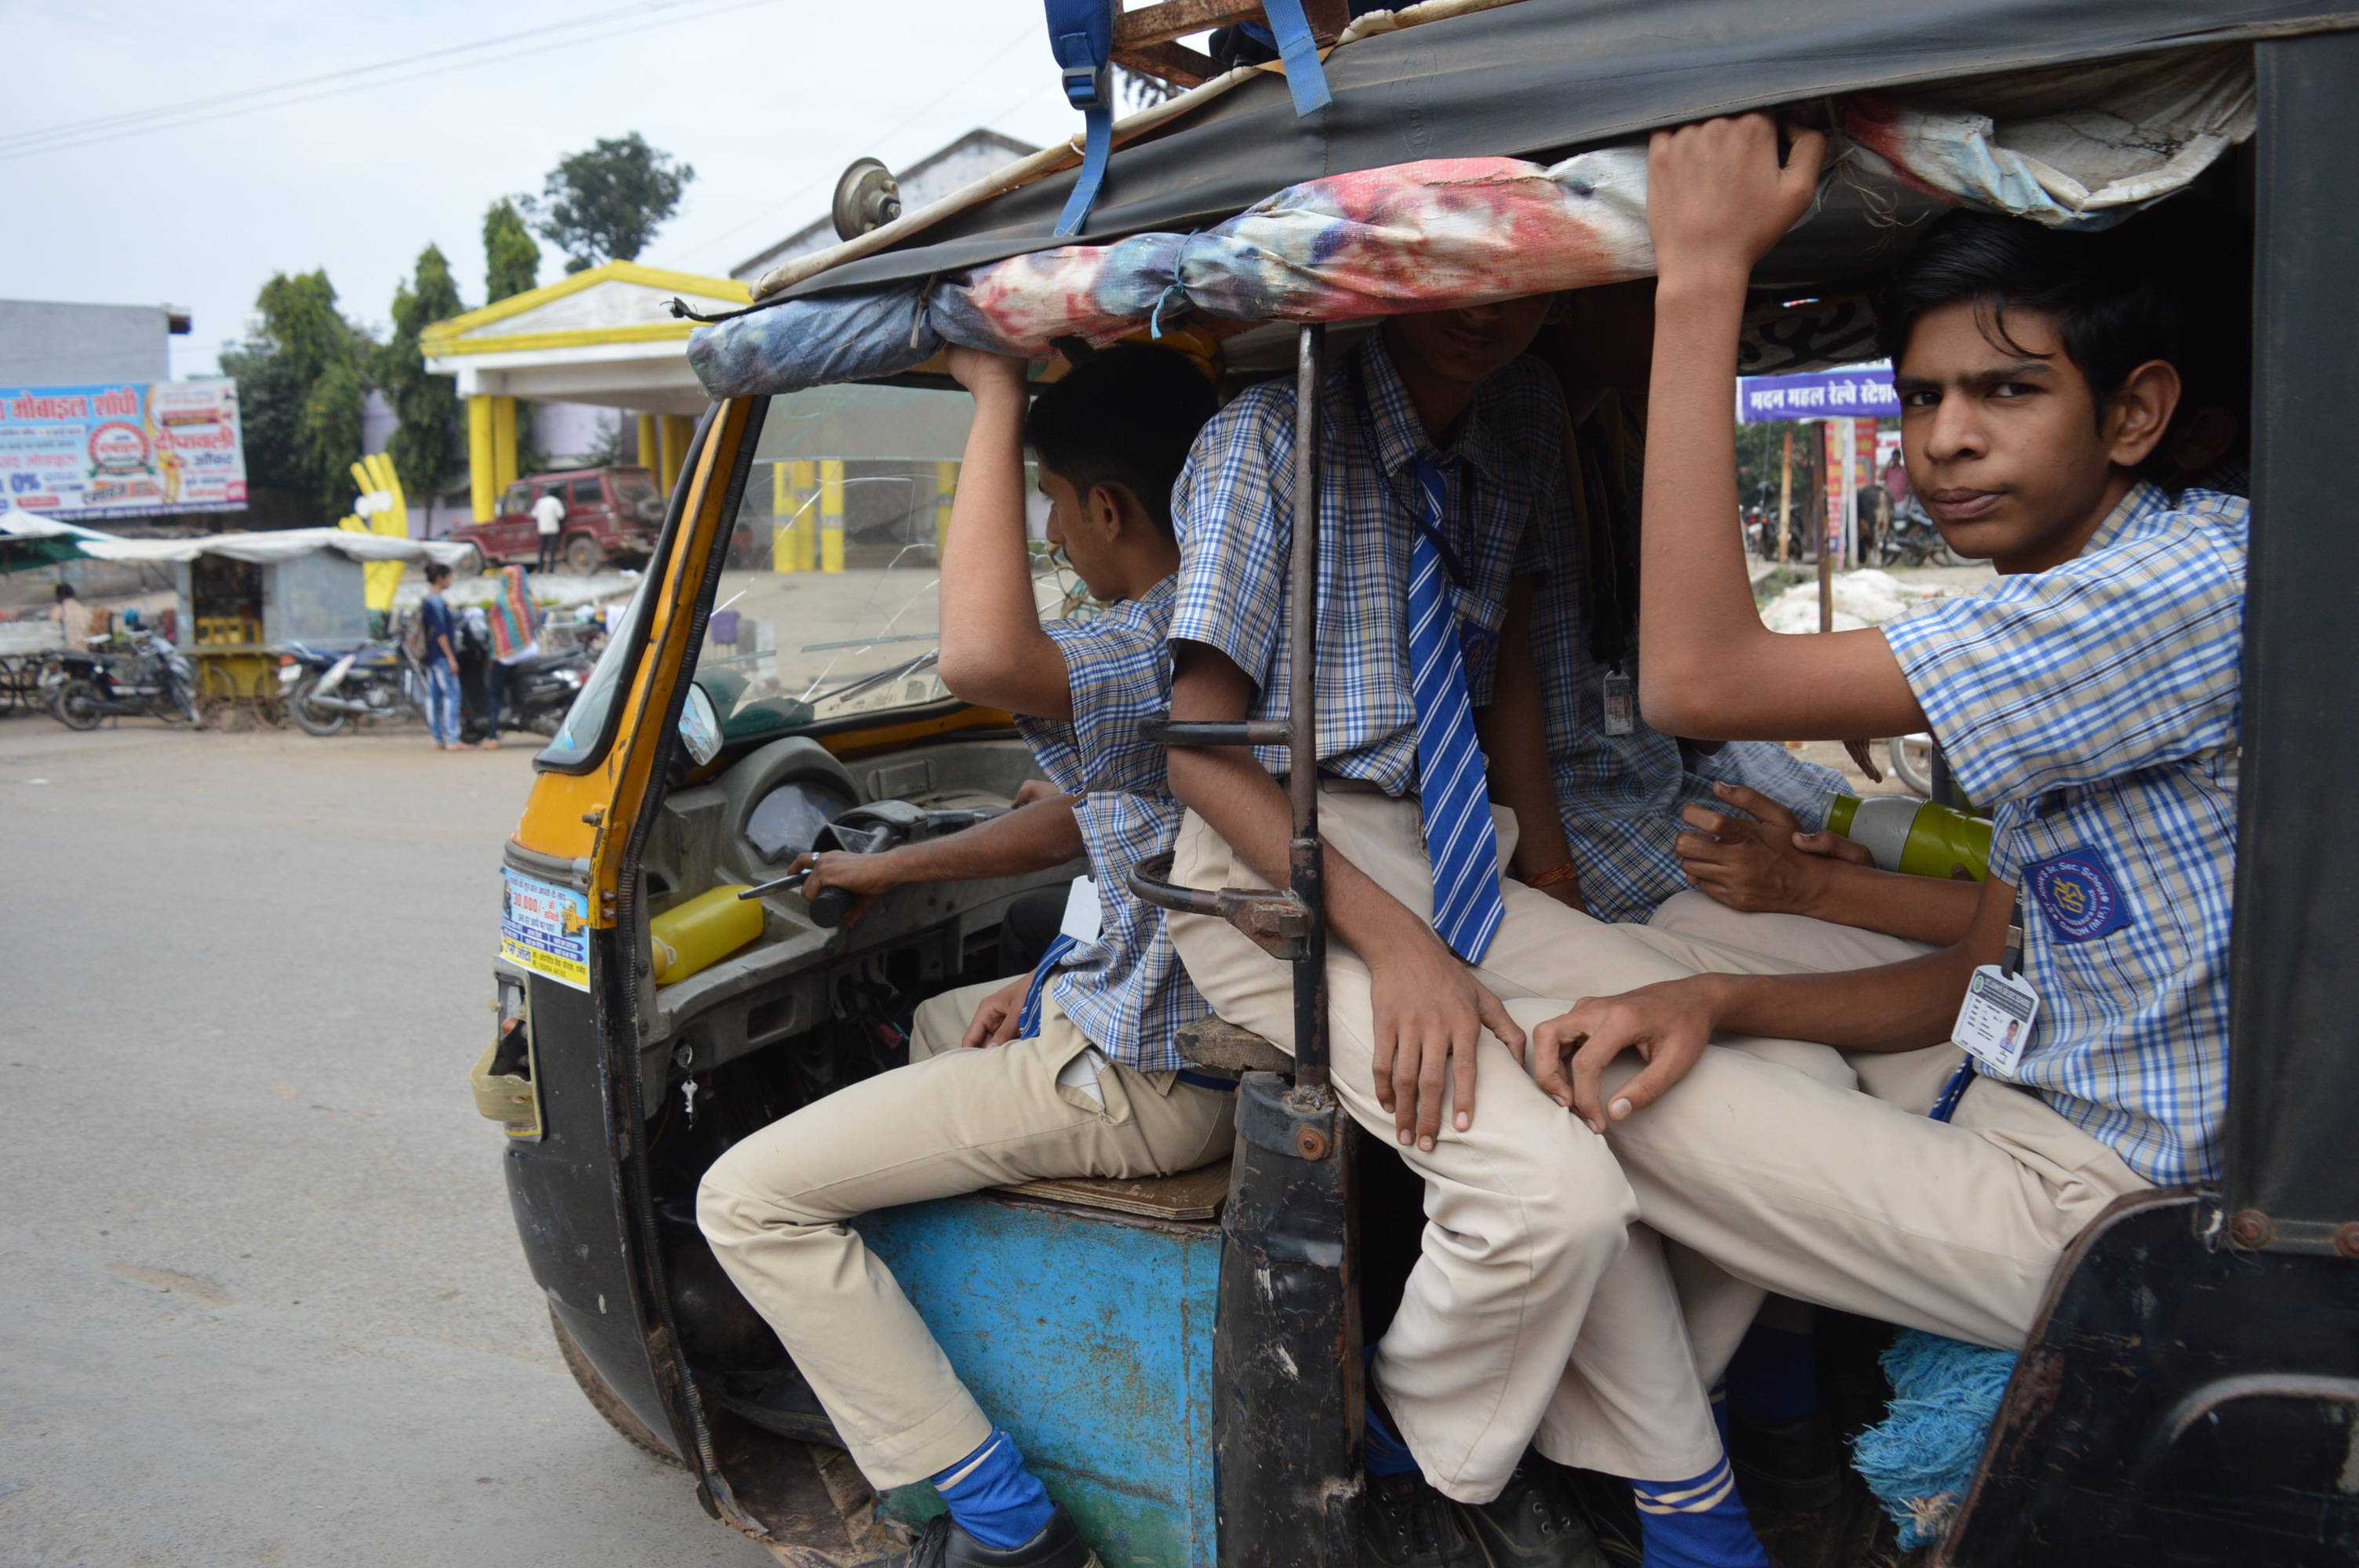 More children are being carried in auto rickshaws